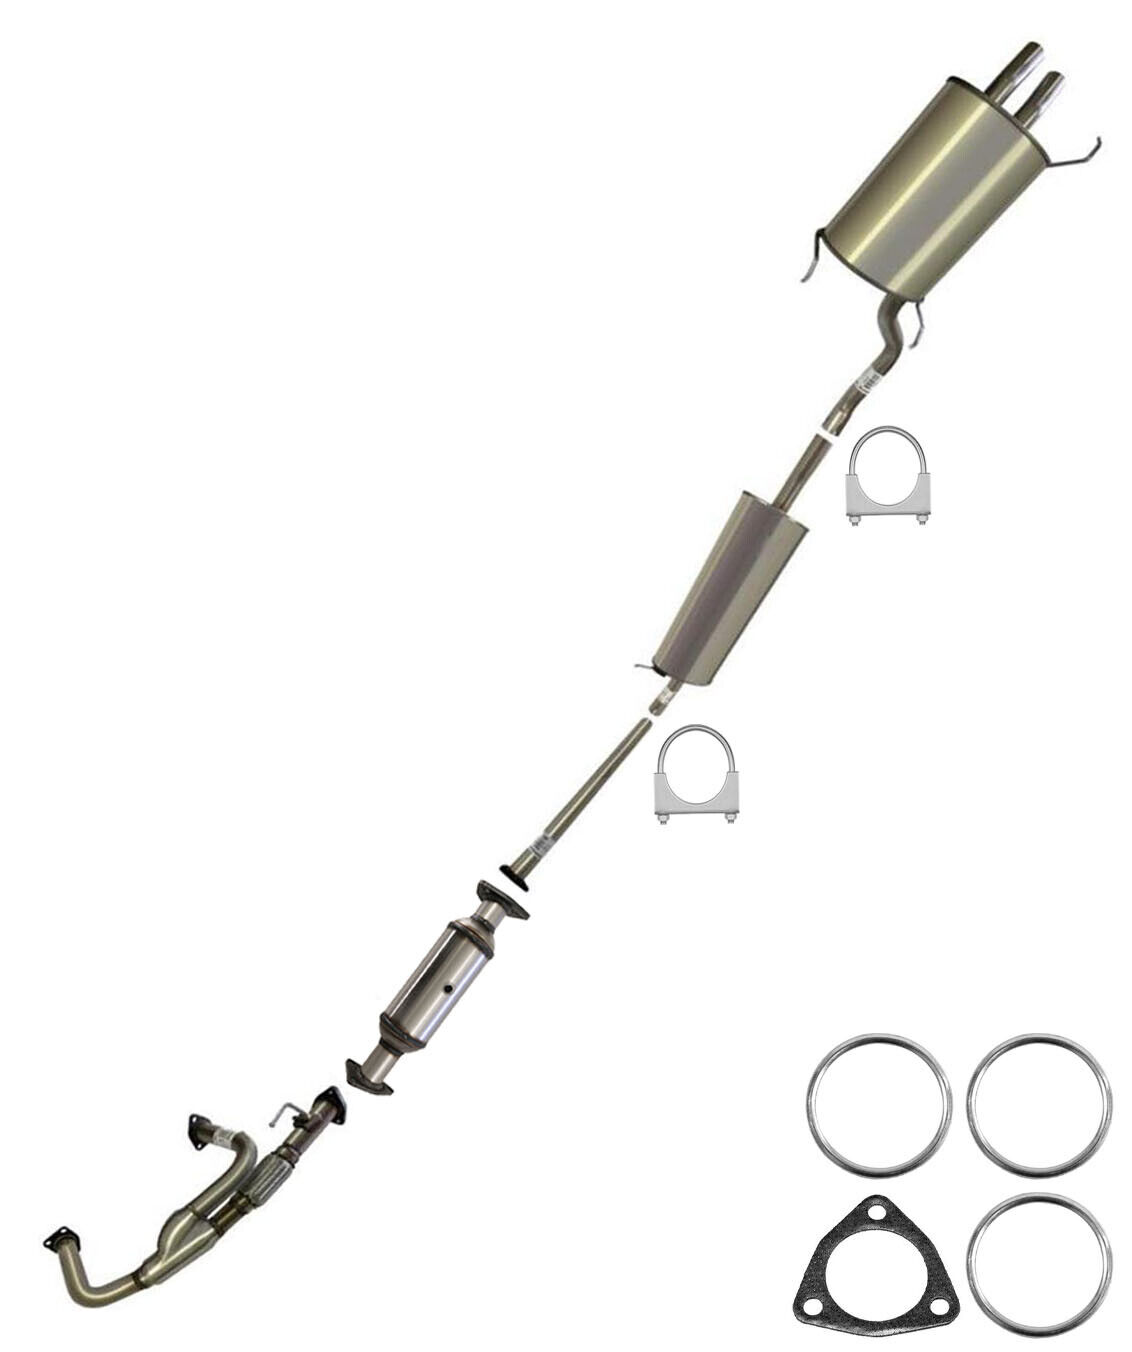 Stainless Steel Catalytic Converter Exhaust System fits: 01-02 MDX 03-04 Pilot